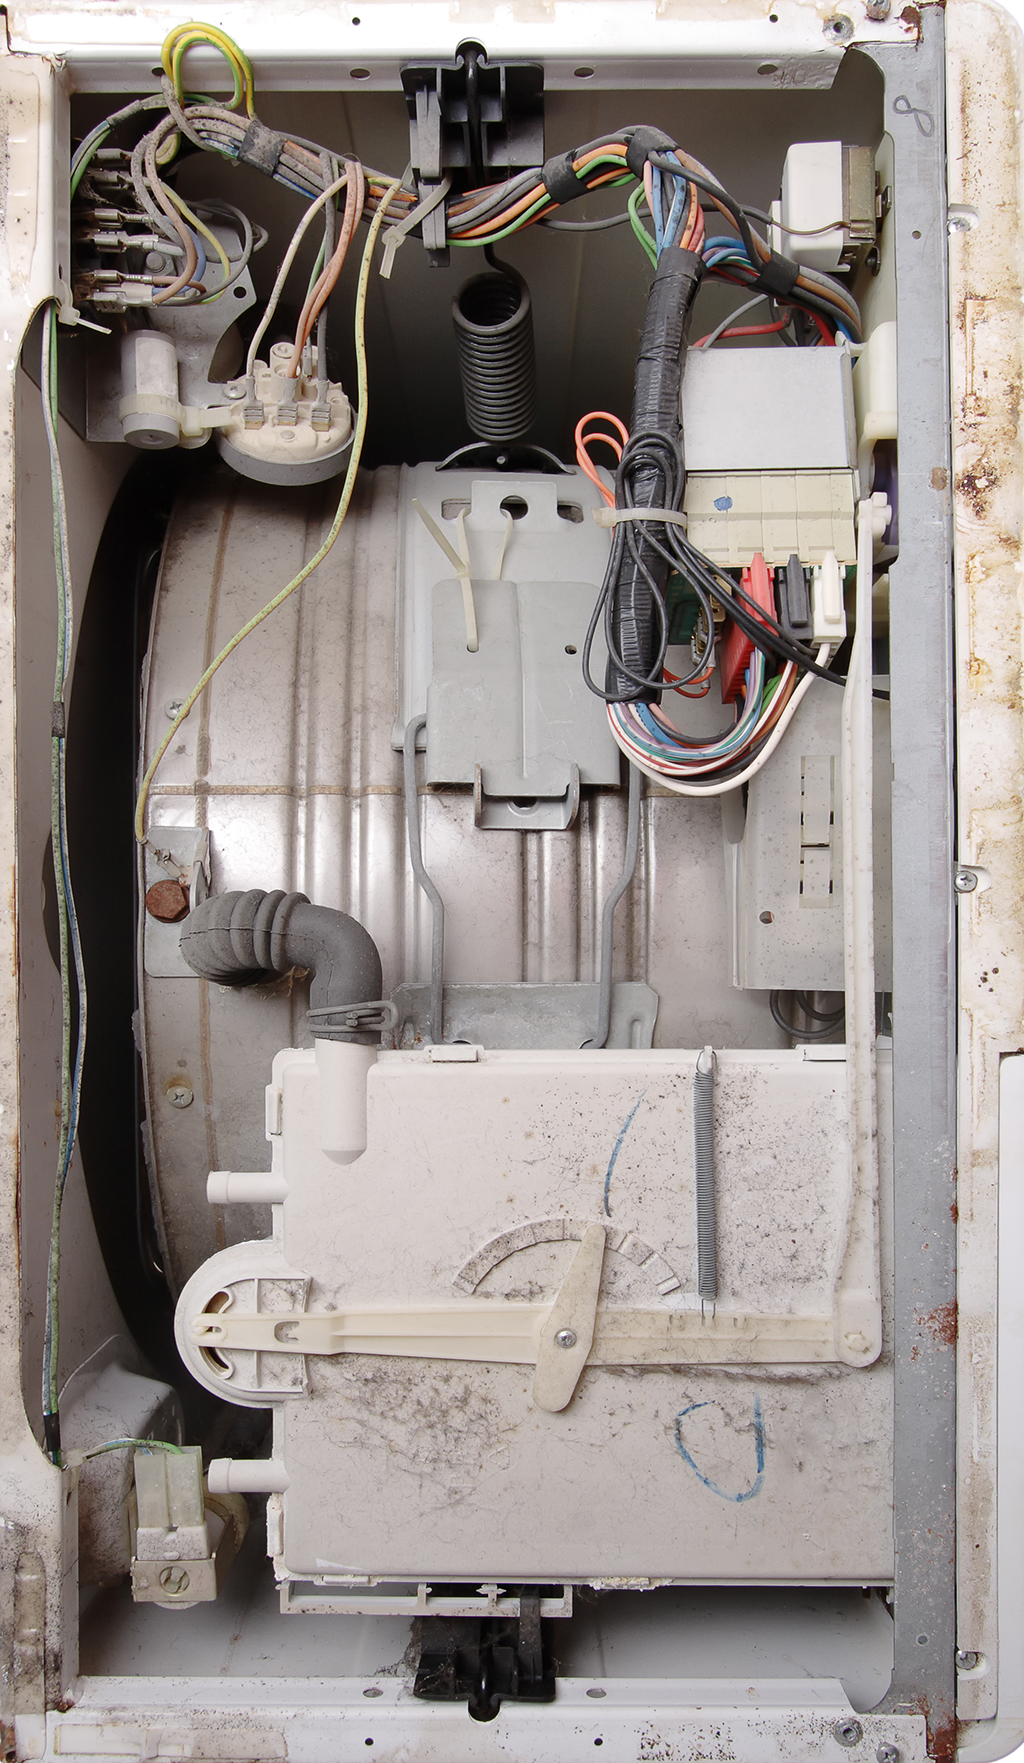 Old Appliances Can Be An Electrical Hazard & Create The Need For An Emergency Electrician | Myrtle Beach, SC